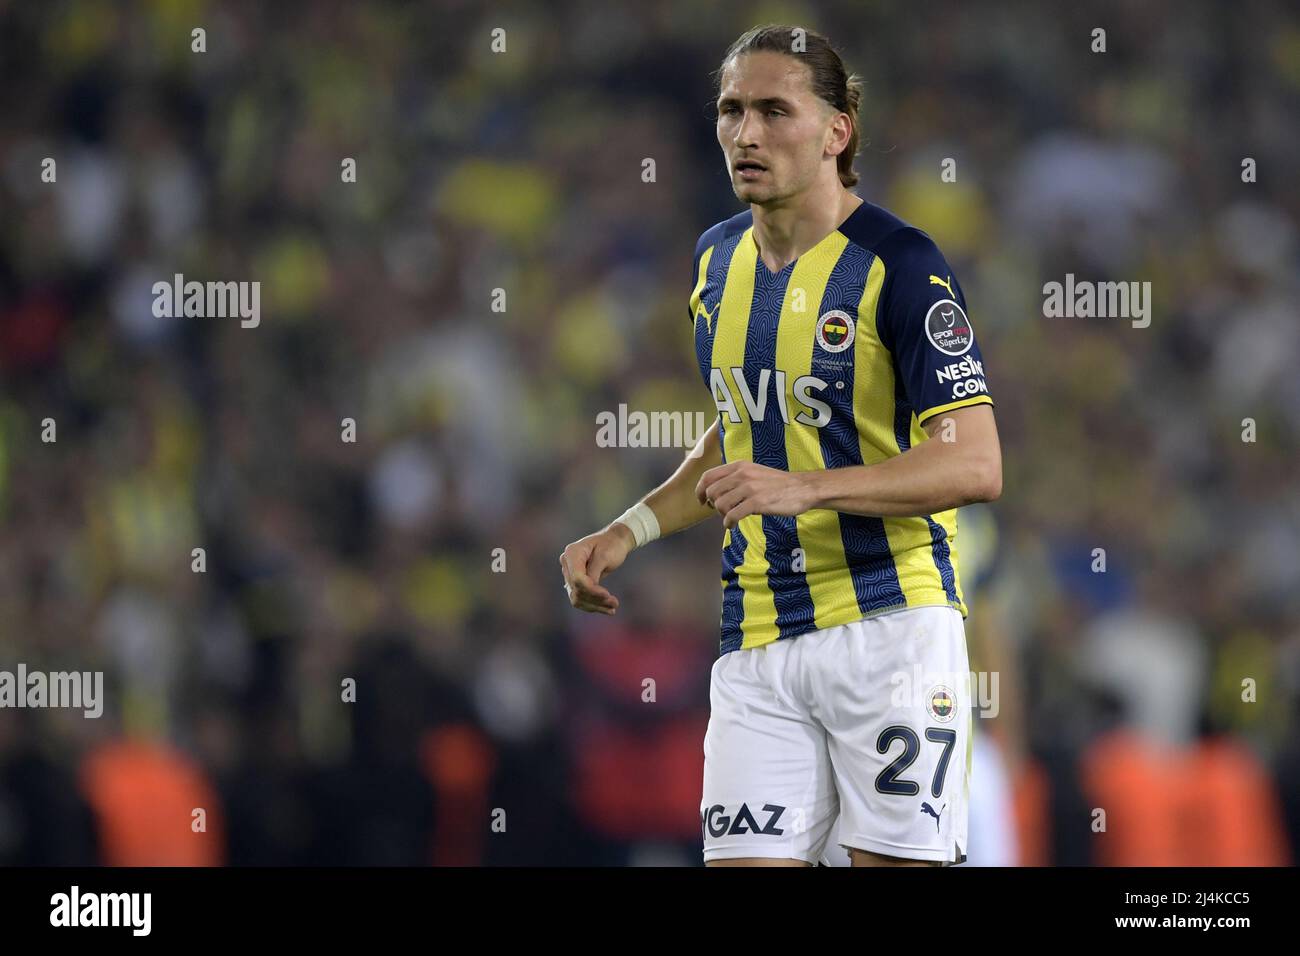 ISTANBUL - Miguel Crespo da Silva of Fenerbahce SK during the Turkish  Superliga match between Fenerbahce AS and Galatasaray AS at Ulker Fenerbahce  Sukru Saracoglu Stadium on April 10, 2022 in Istanbul,